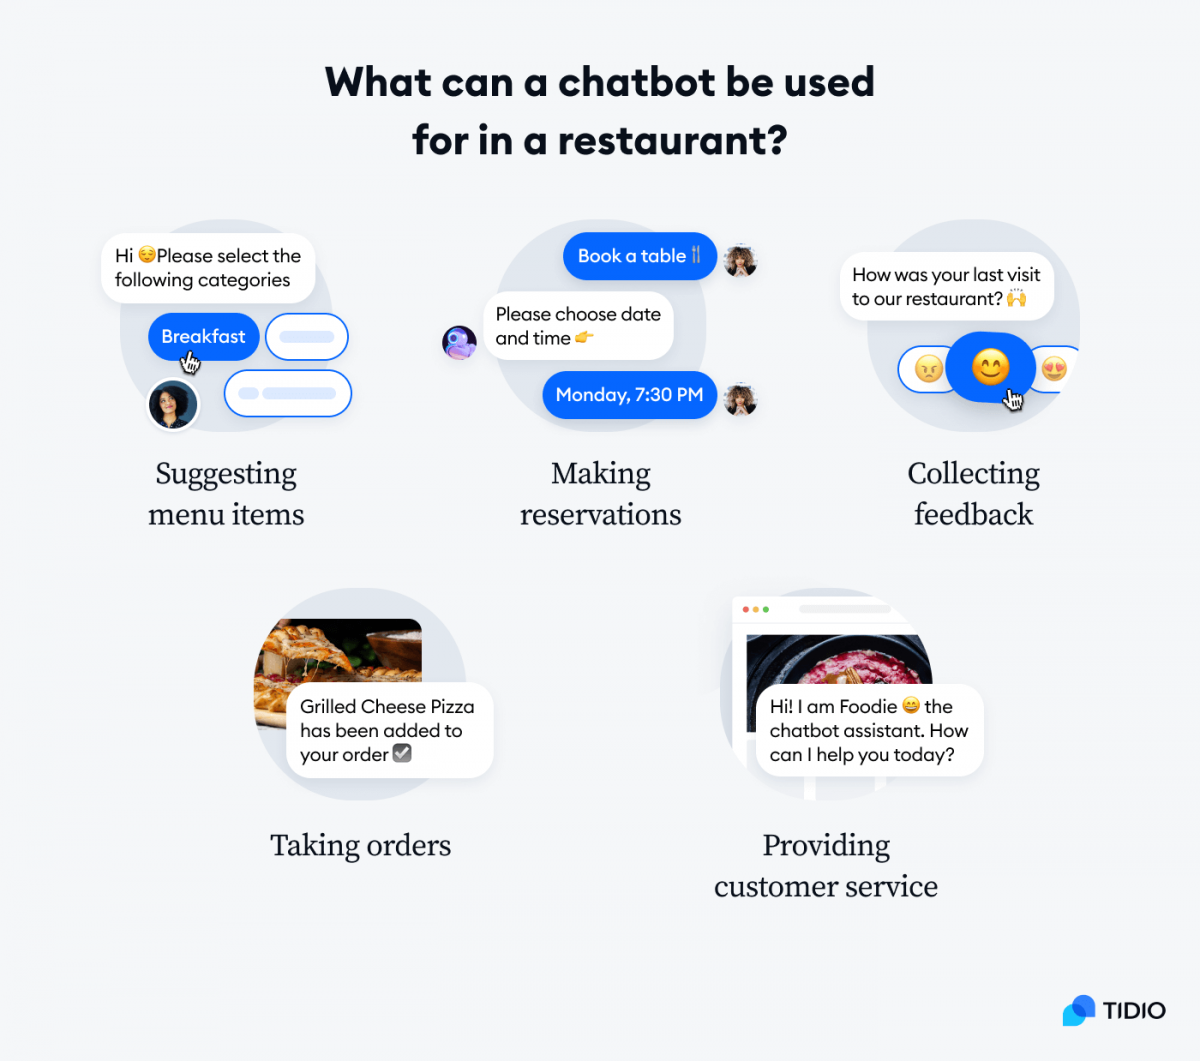 5 use cases of chatbots in a restaurant: suggesting menu items, making reservations, collecting feedback, taking orders, and providing customer service